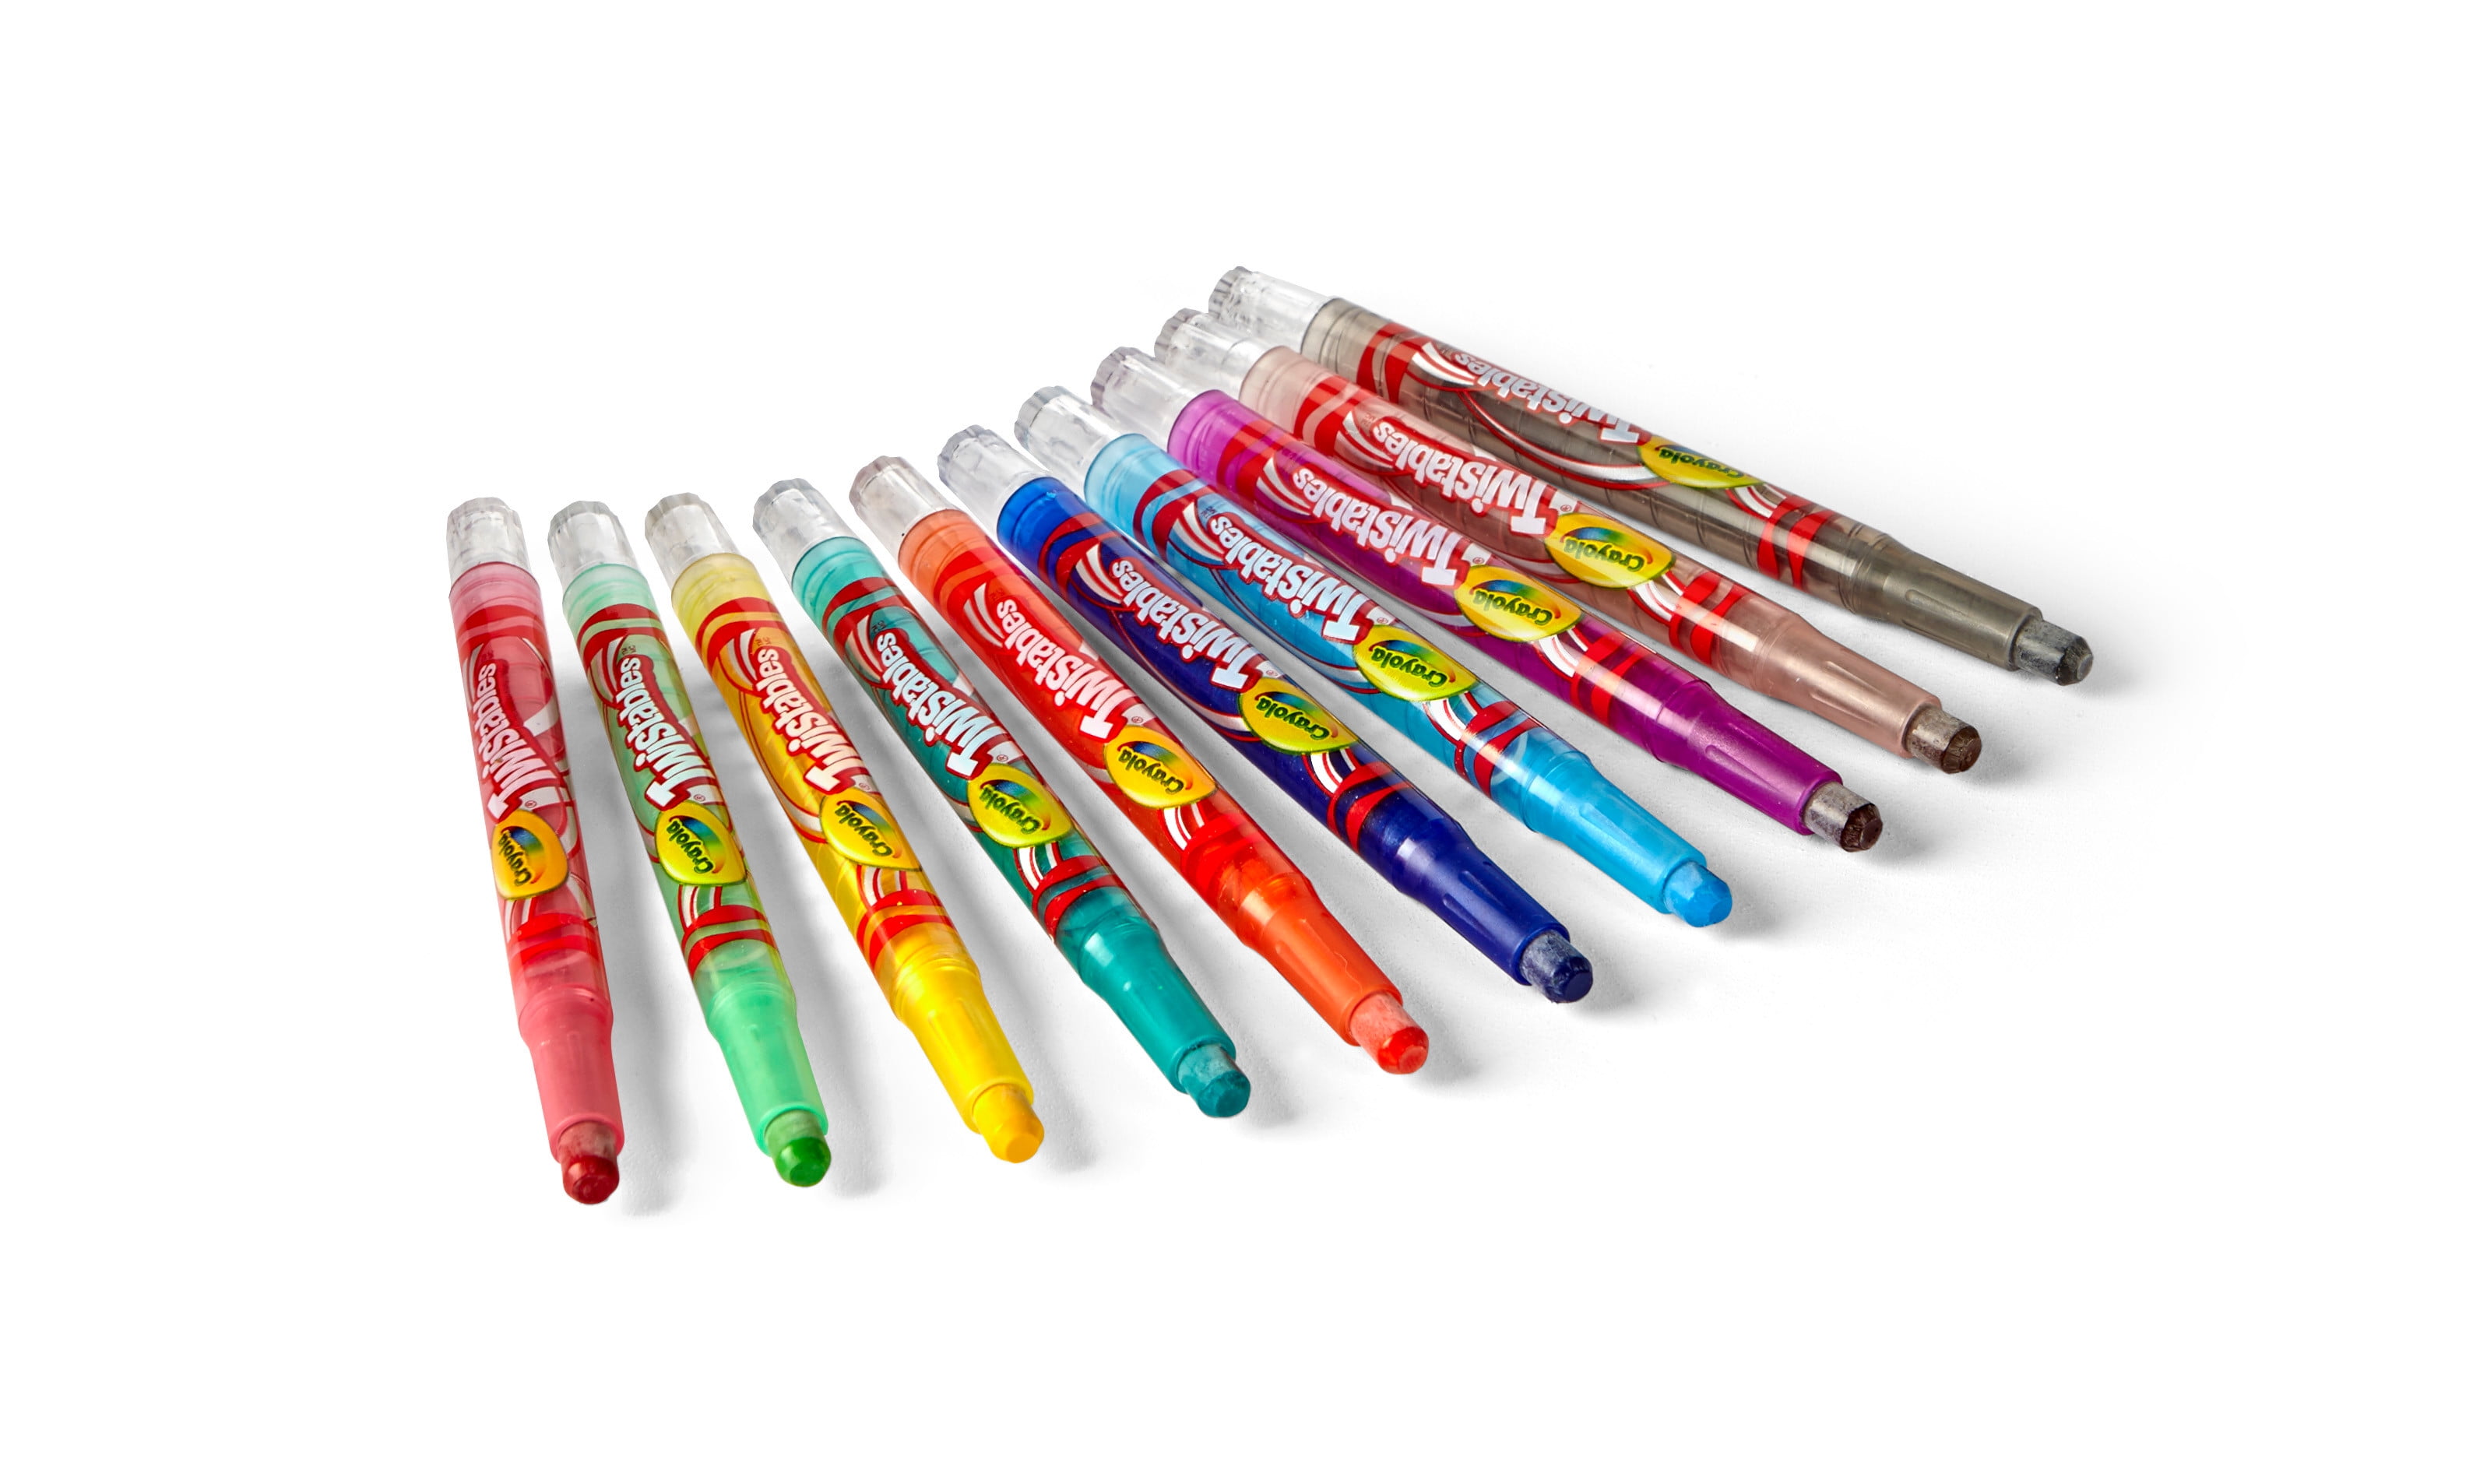 Crayola Mini Twistables Crayons, 10ct, Coloring Gift for Kids